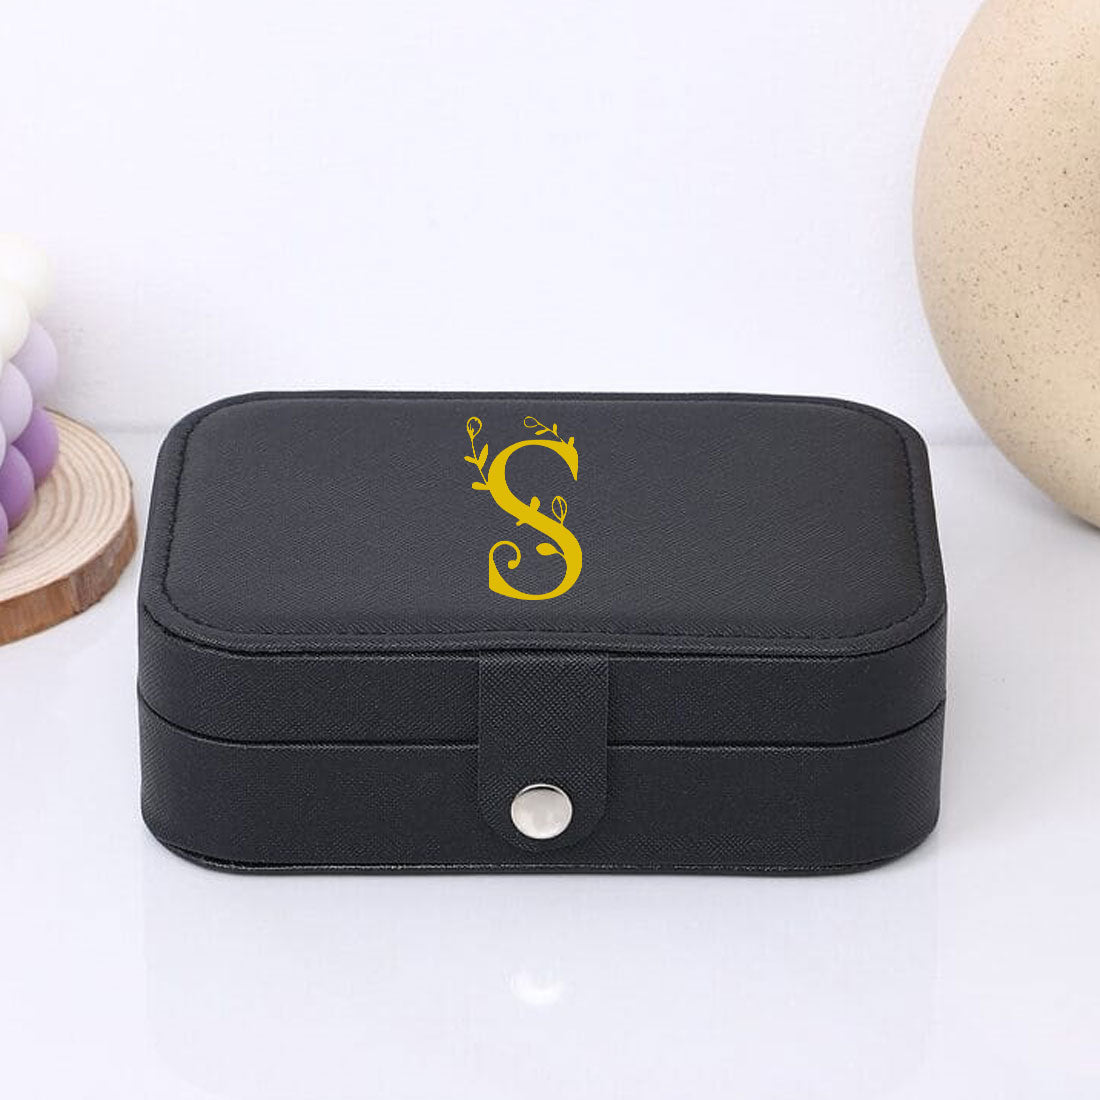 Personalized Jewellery Box for Gifting jewelry Case Earrings Pendant - Monogram